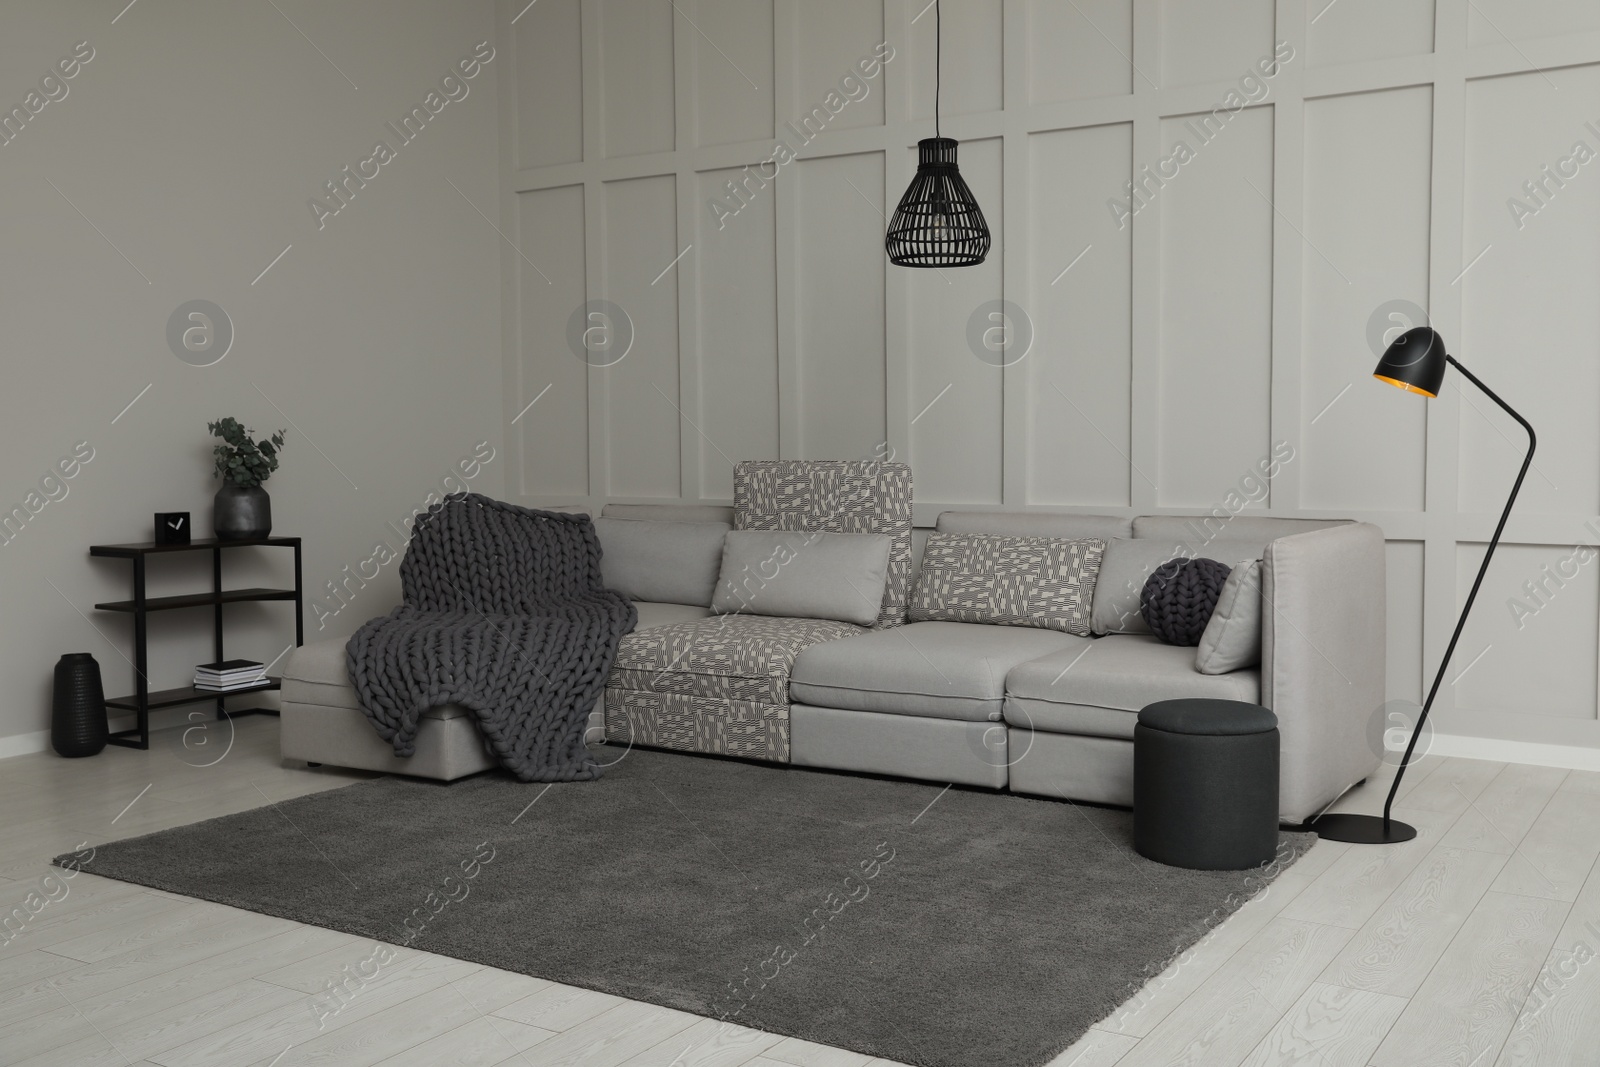 Photo of Living room interior with comfortable sofa near molding wall